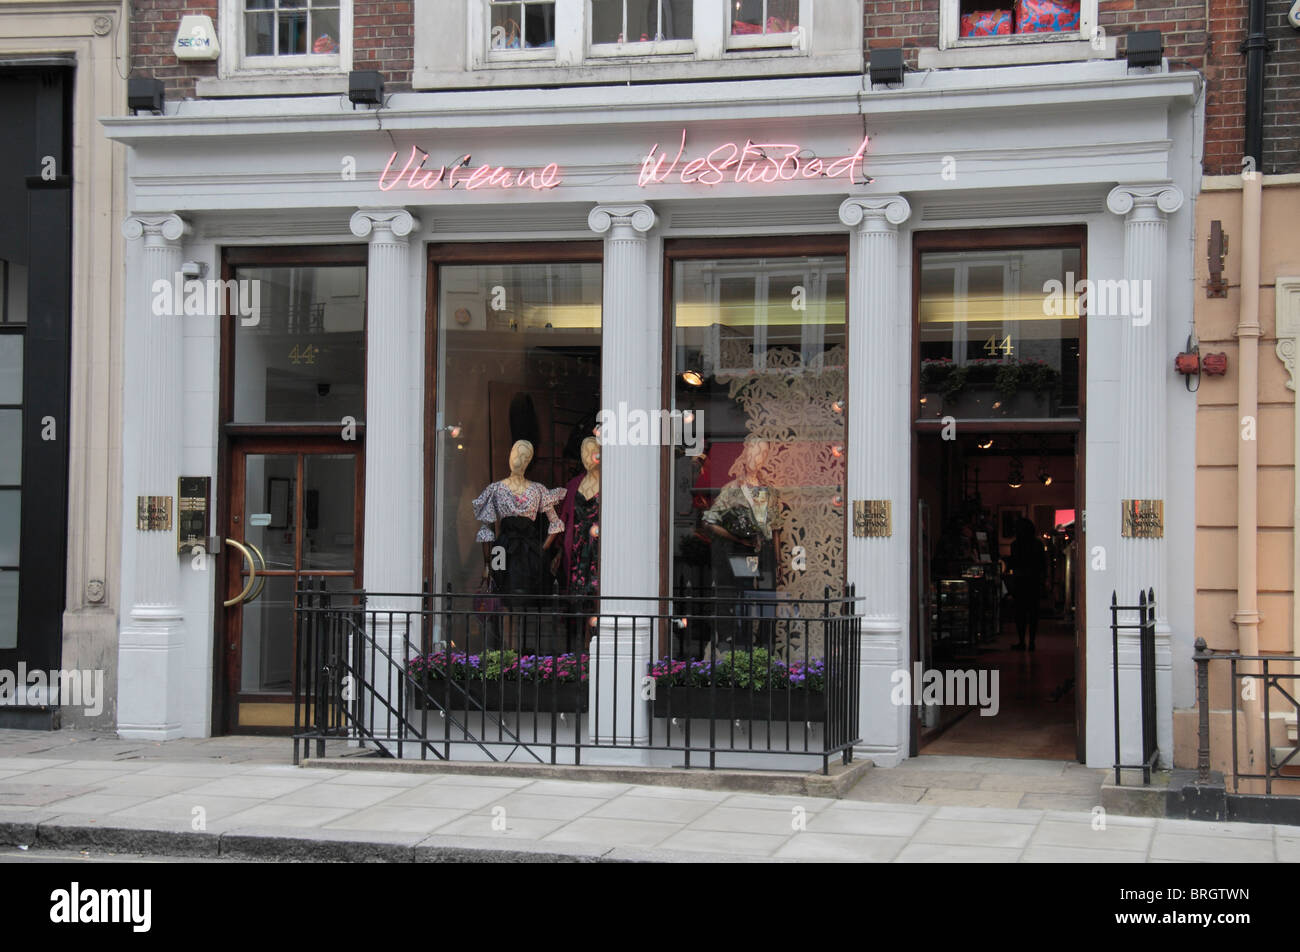 Shop front of the Vivienne Westwood clothing store on Conduit Street, London, UK. Stock Photo